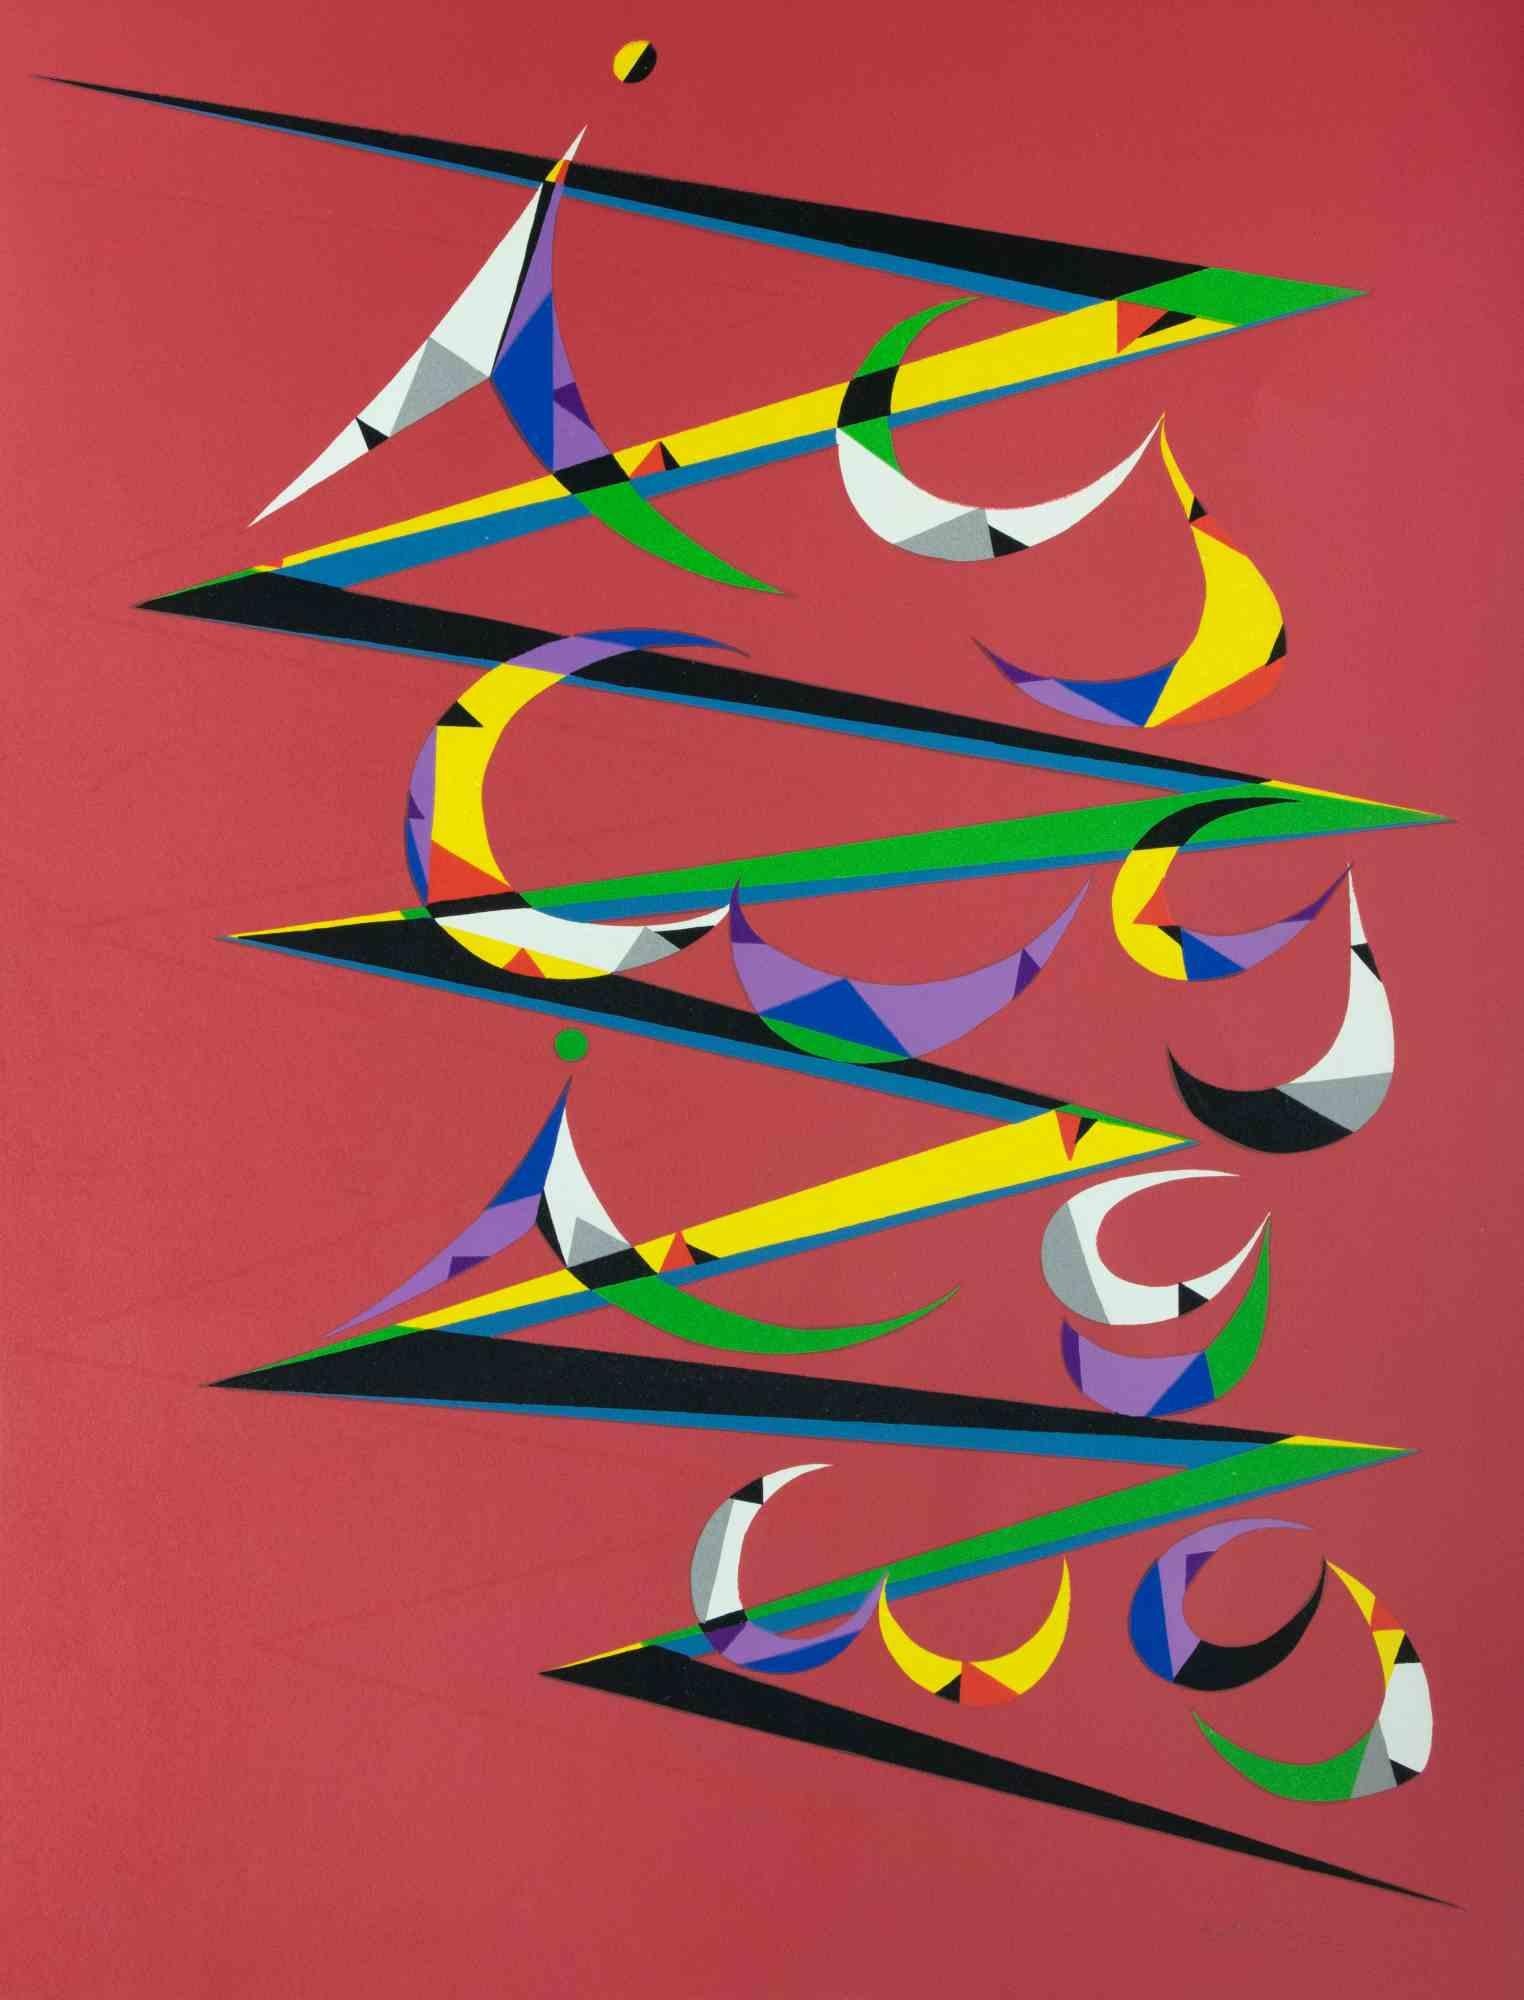 Composition is a lithograph, realized by Rafael Alberti in 1972.

Hand-signed, dated, numbered on the lower margin.

Edition of 99.

The artwork represents a brilliant composition through shapes and colors, with a poetical abstract harmony which is